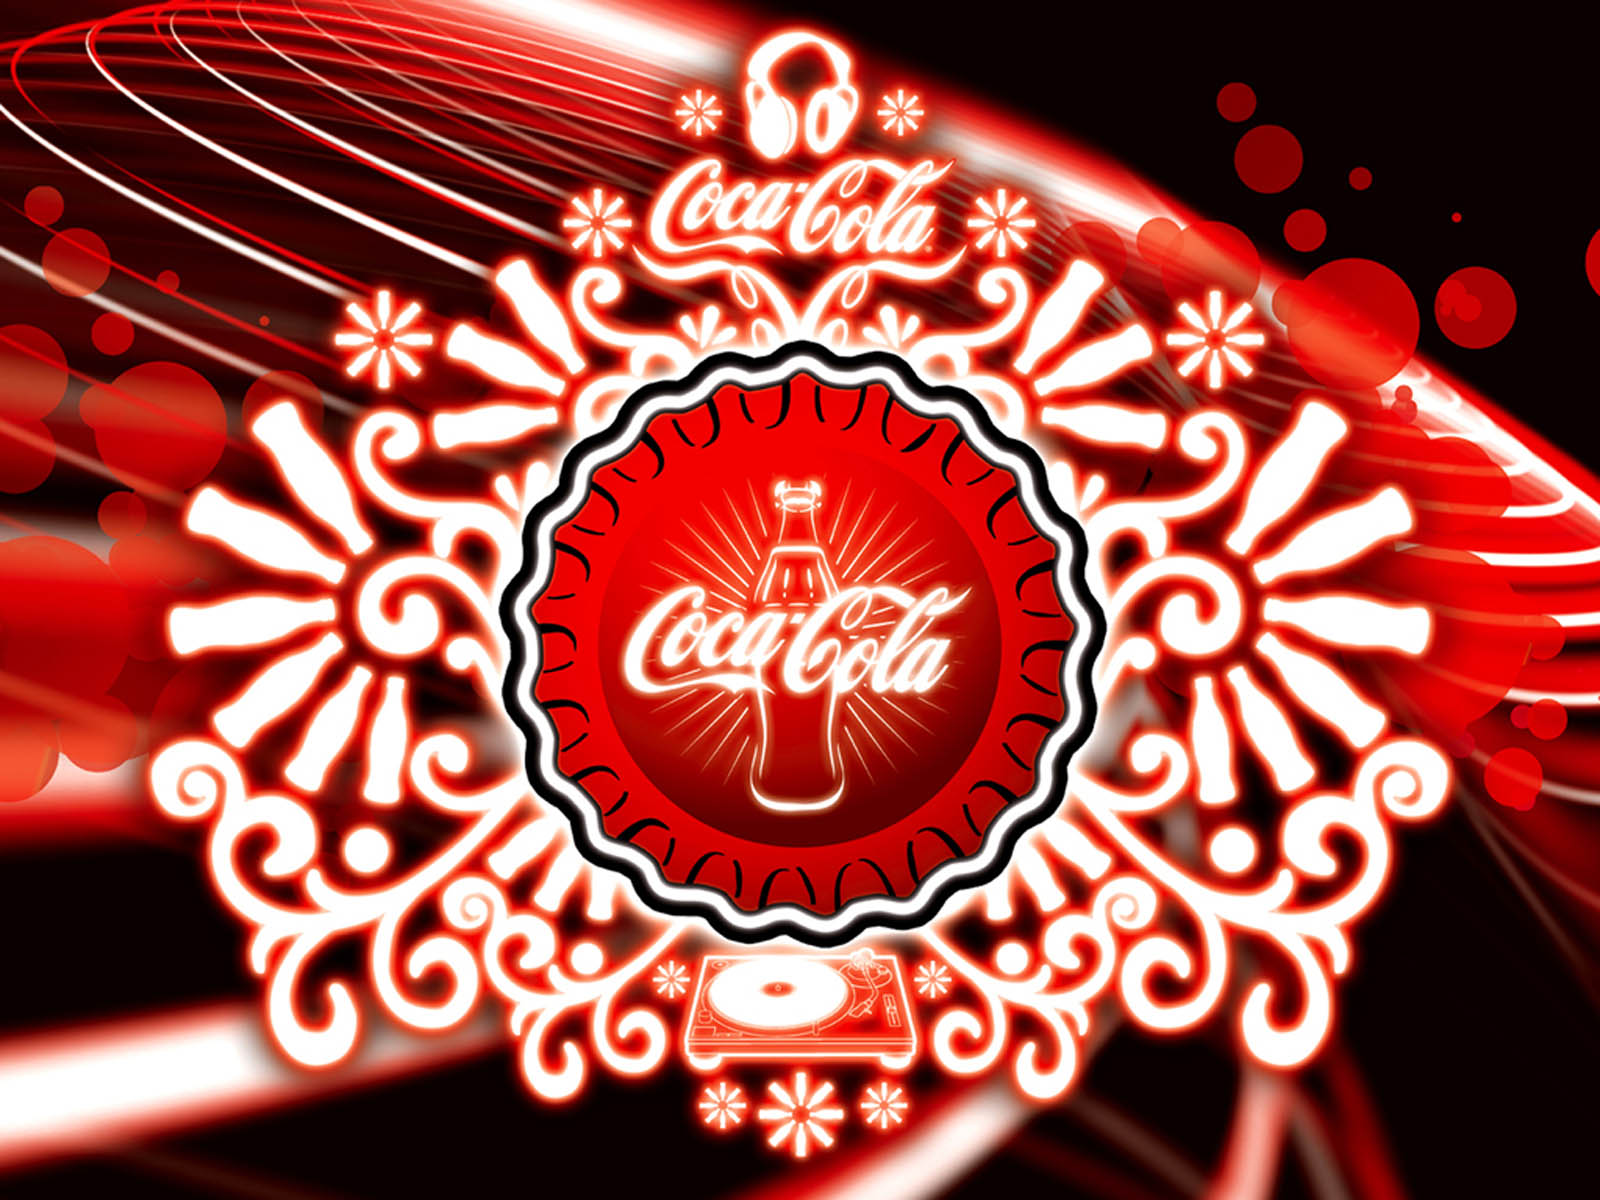 The Coca Cola Wallpaper In Category Of